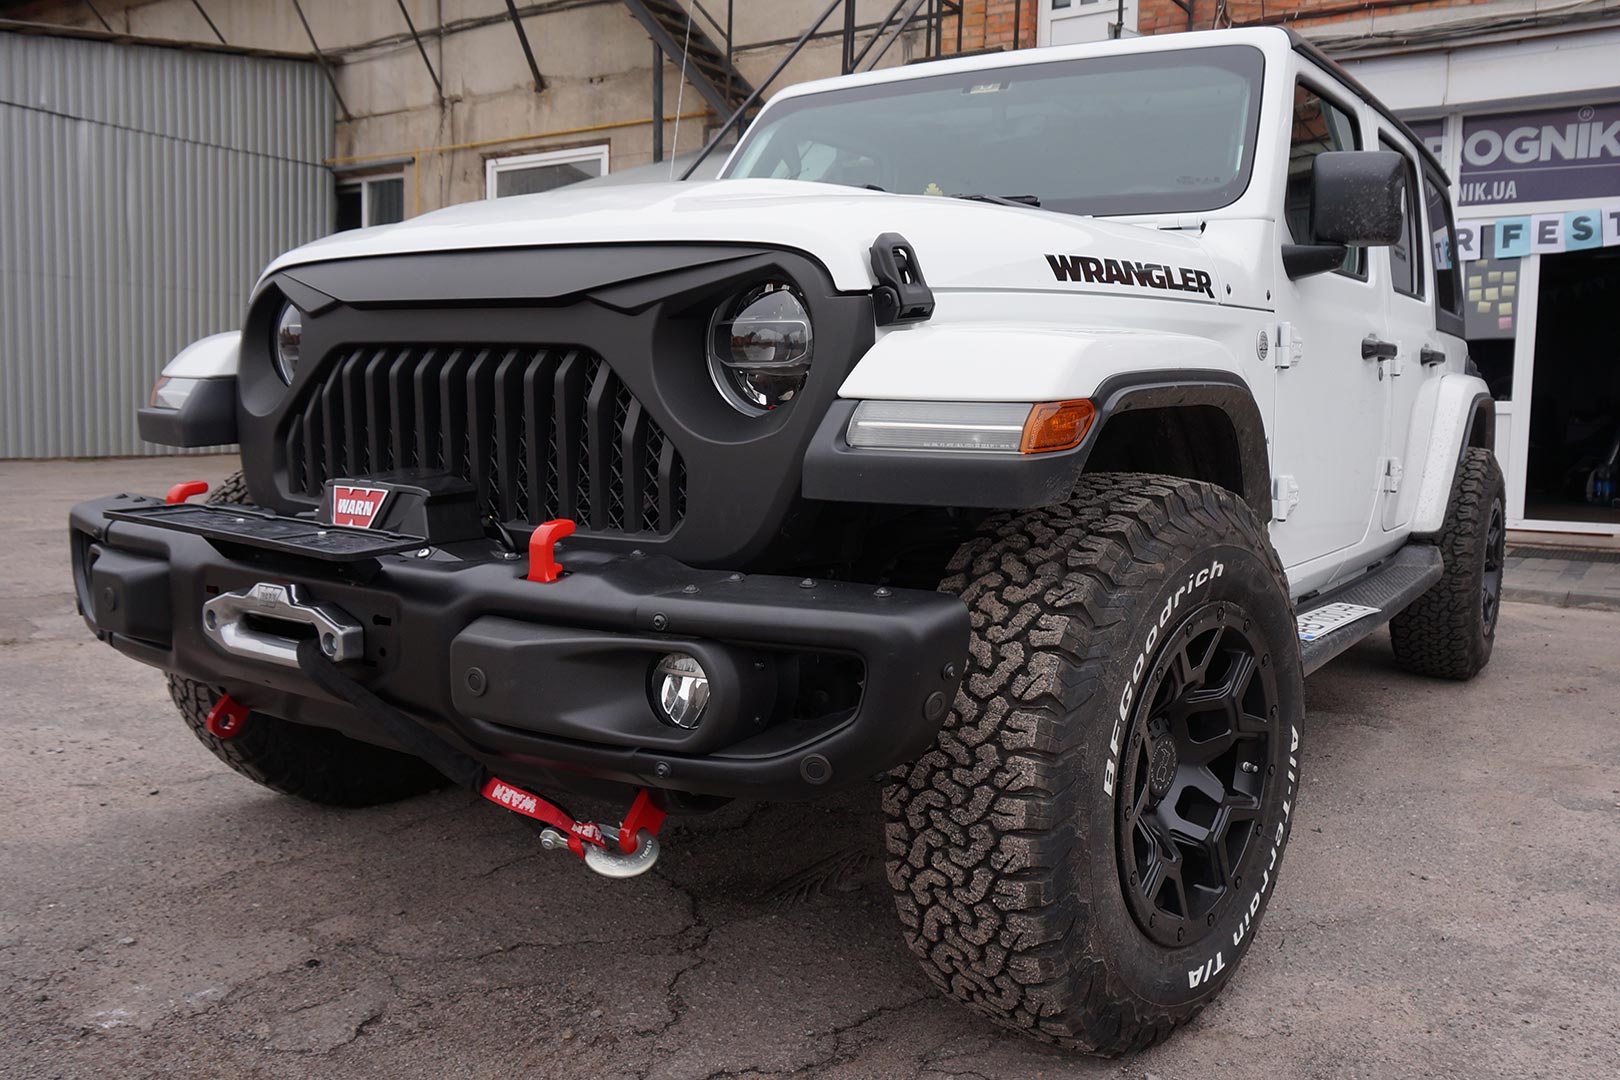 Tuning Jeep Wrangler JL photos and details